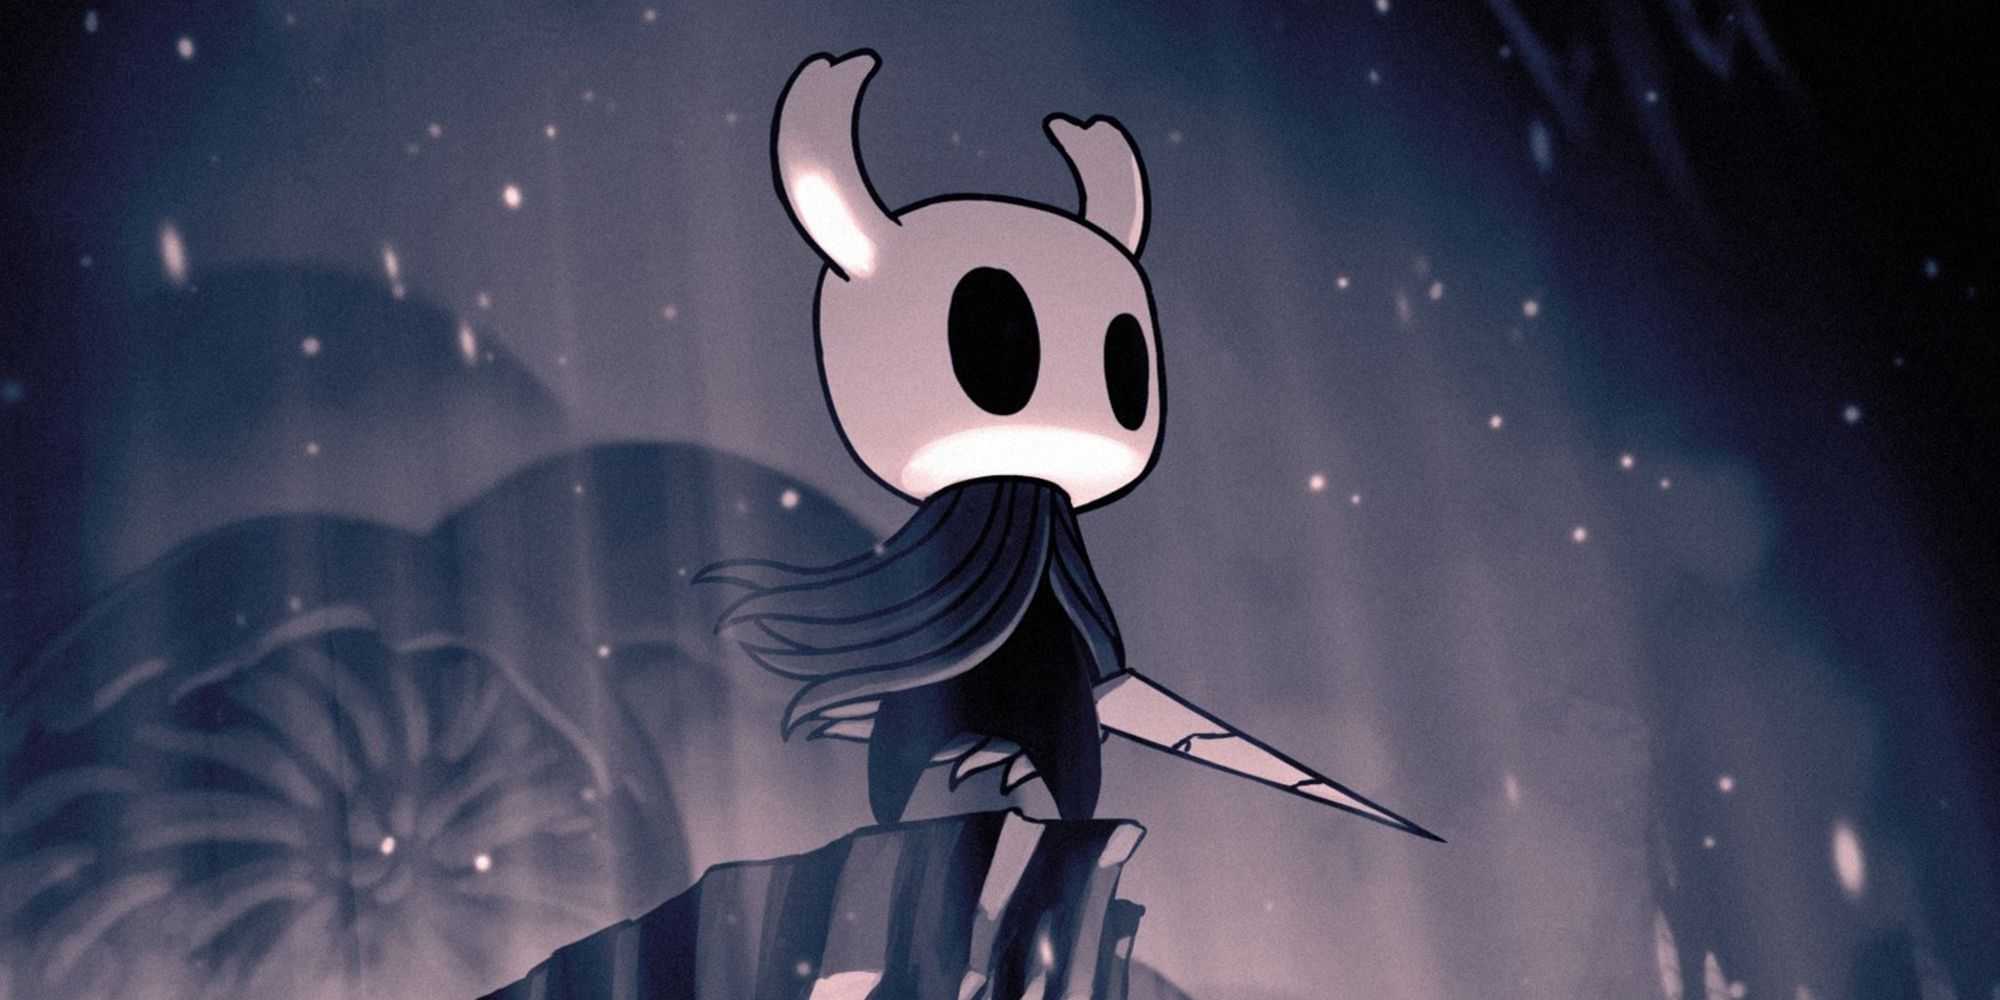 Hollow Knight Image Showing The Vessel Main Character Up Close